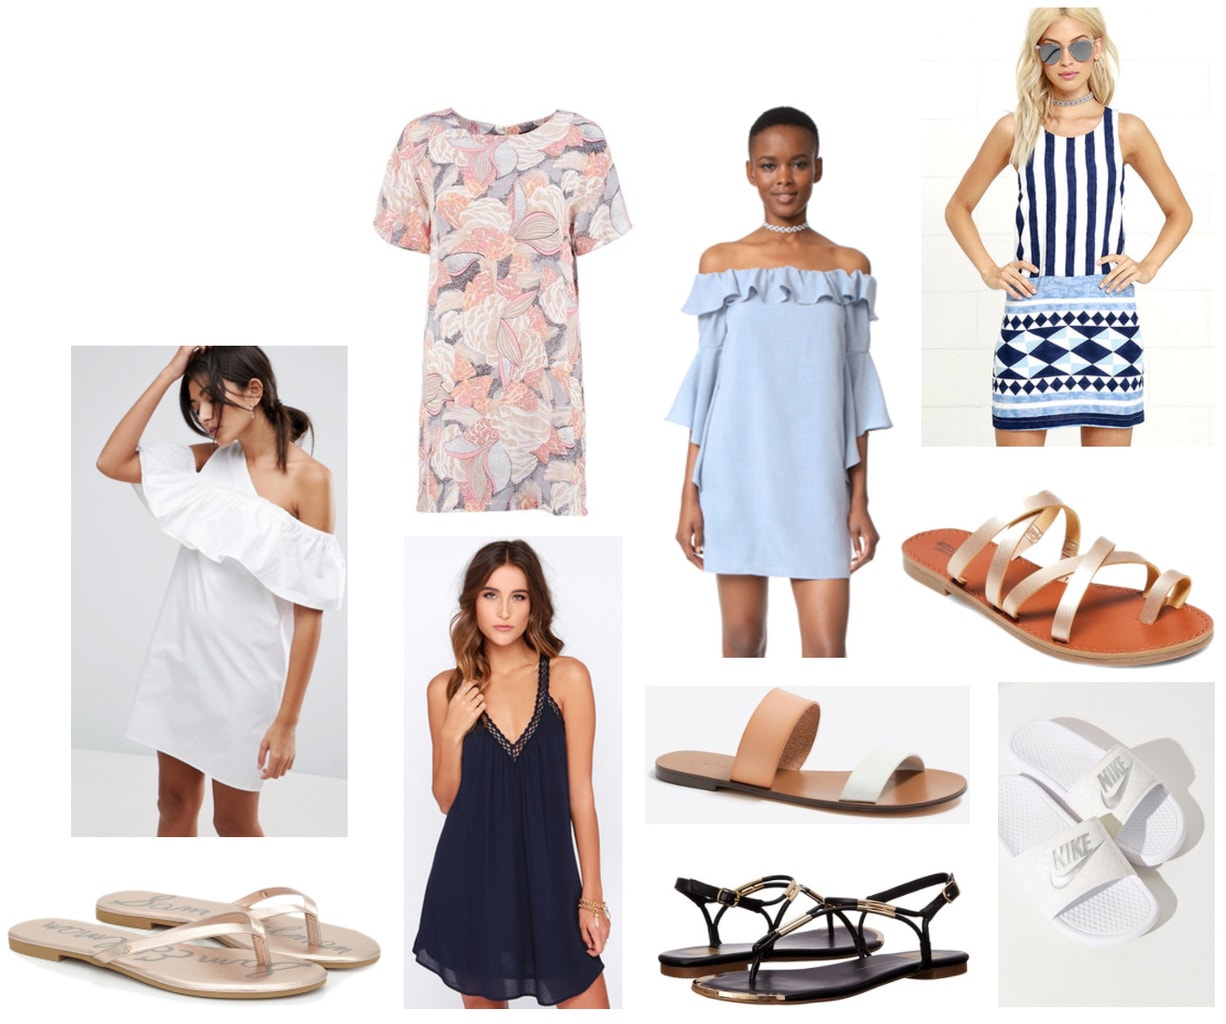 Summer college outfits: Shift dress and sandals. Includes: White off-shoulder ruffle dress, pink and blue patterned shift dress, blue off-the-shoulder shift dress, light blue and navy patterned shift dress. Sandals include gold strappy sandals, black Dolce Vita sandals, white Nike slip ons, metallic gold flip flops